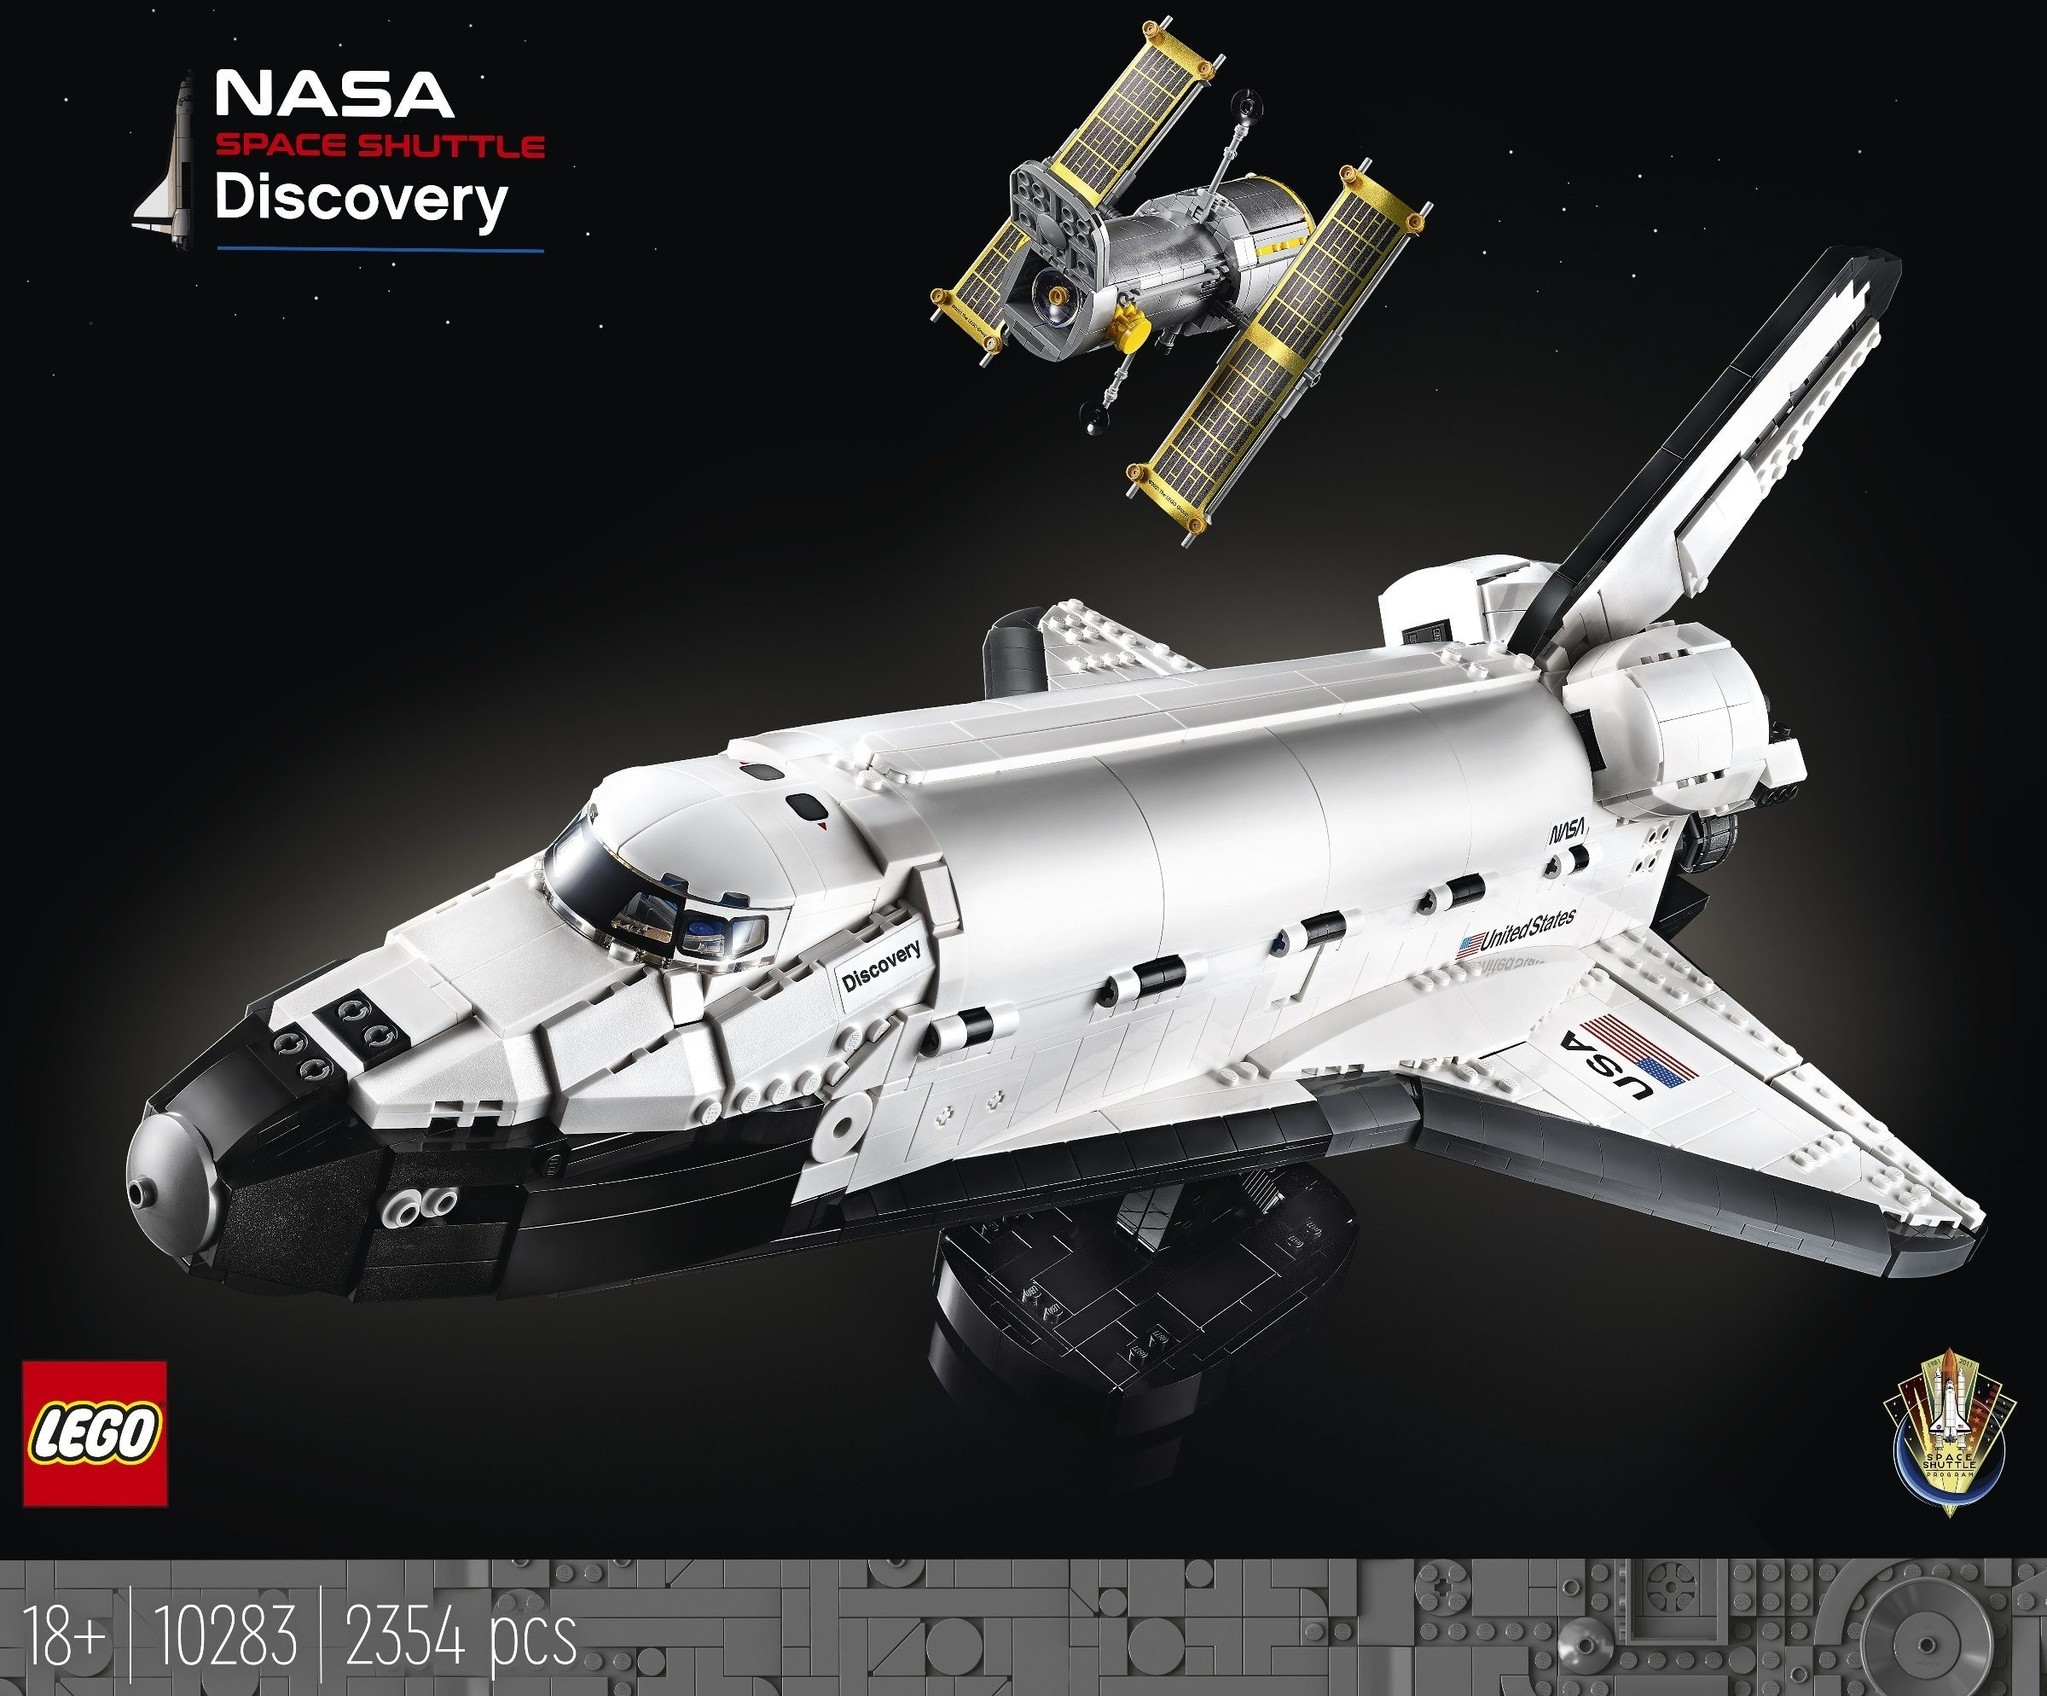 NASA SPACE SHUTTLE DISCOVERY - THE TOY STORE